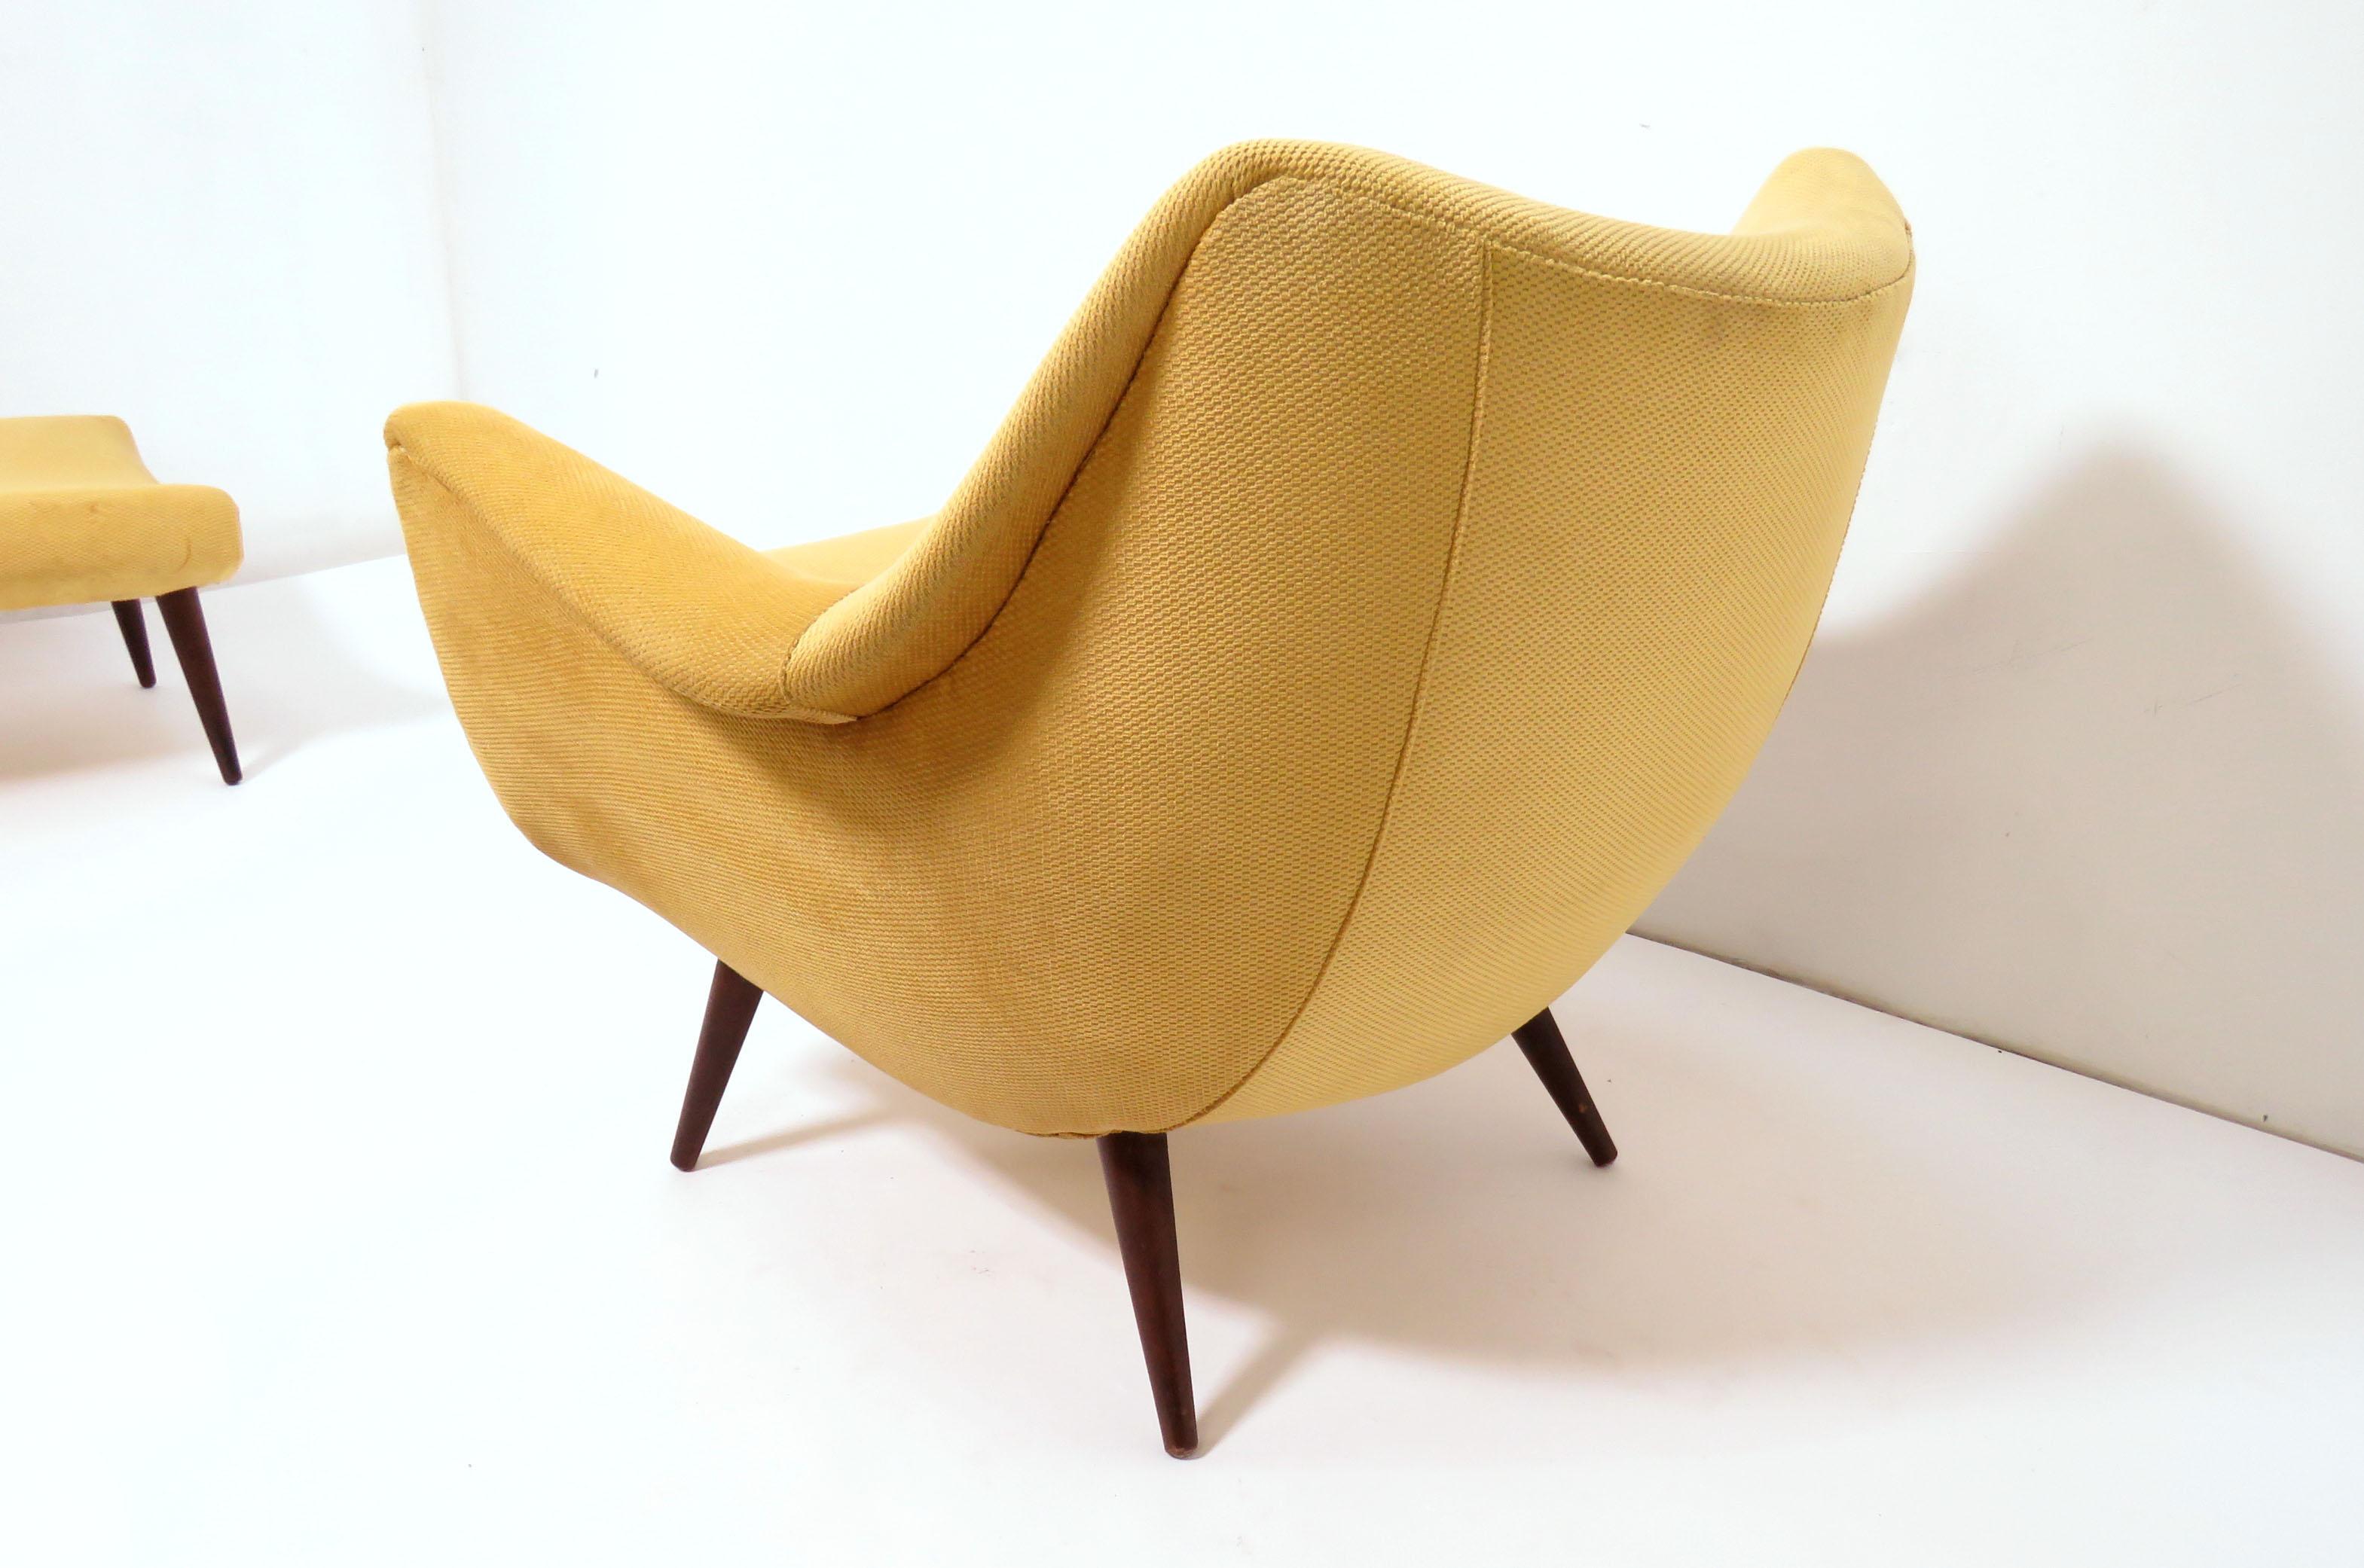 American Lawrence Peabody Midcentury Lounge Chair and Ottoman, circa 1950s